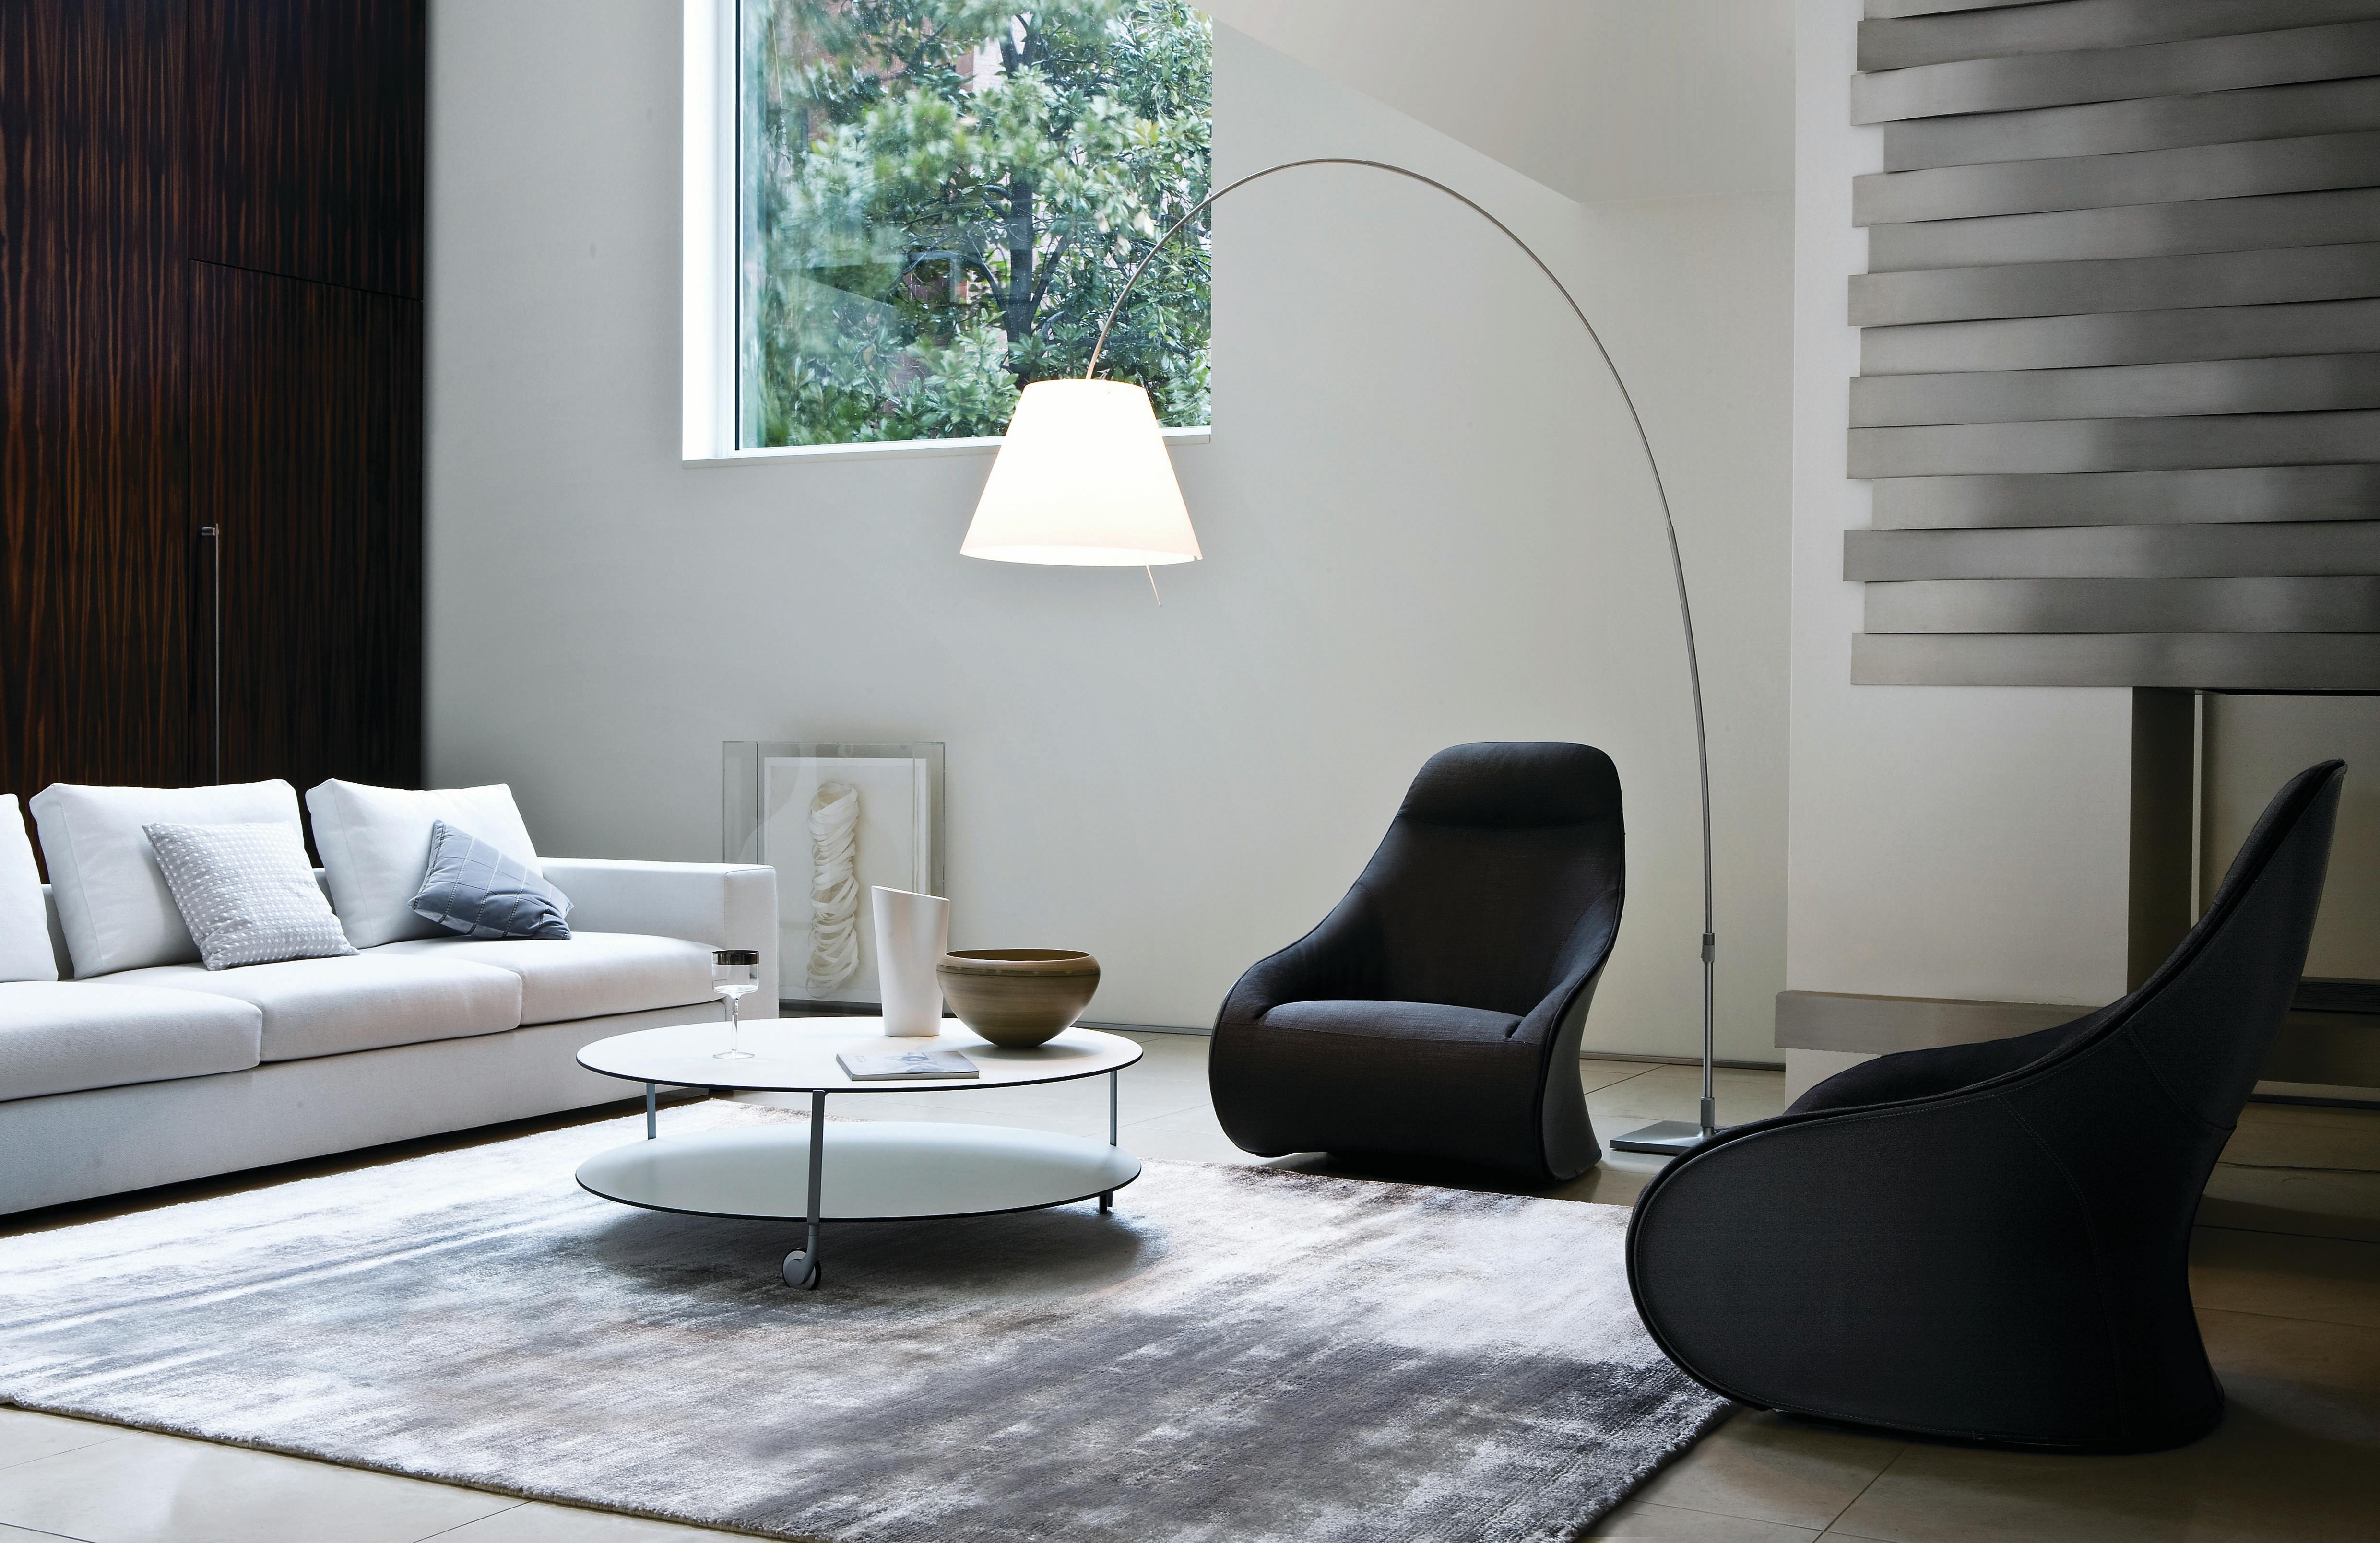 Contemporary Zanotta Derby Armchair with Pouf in White Upholstery by Noé Duchaufour Lawrance For Sale